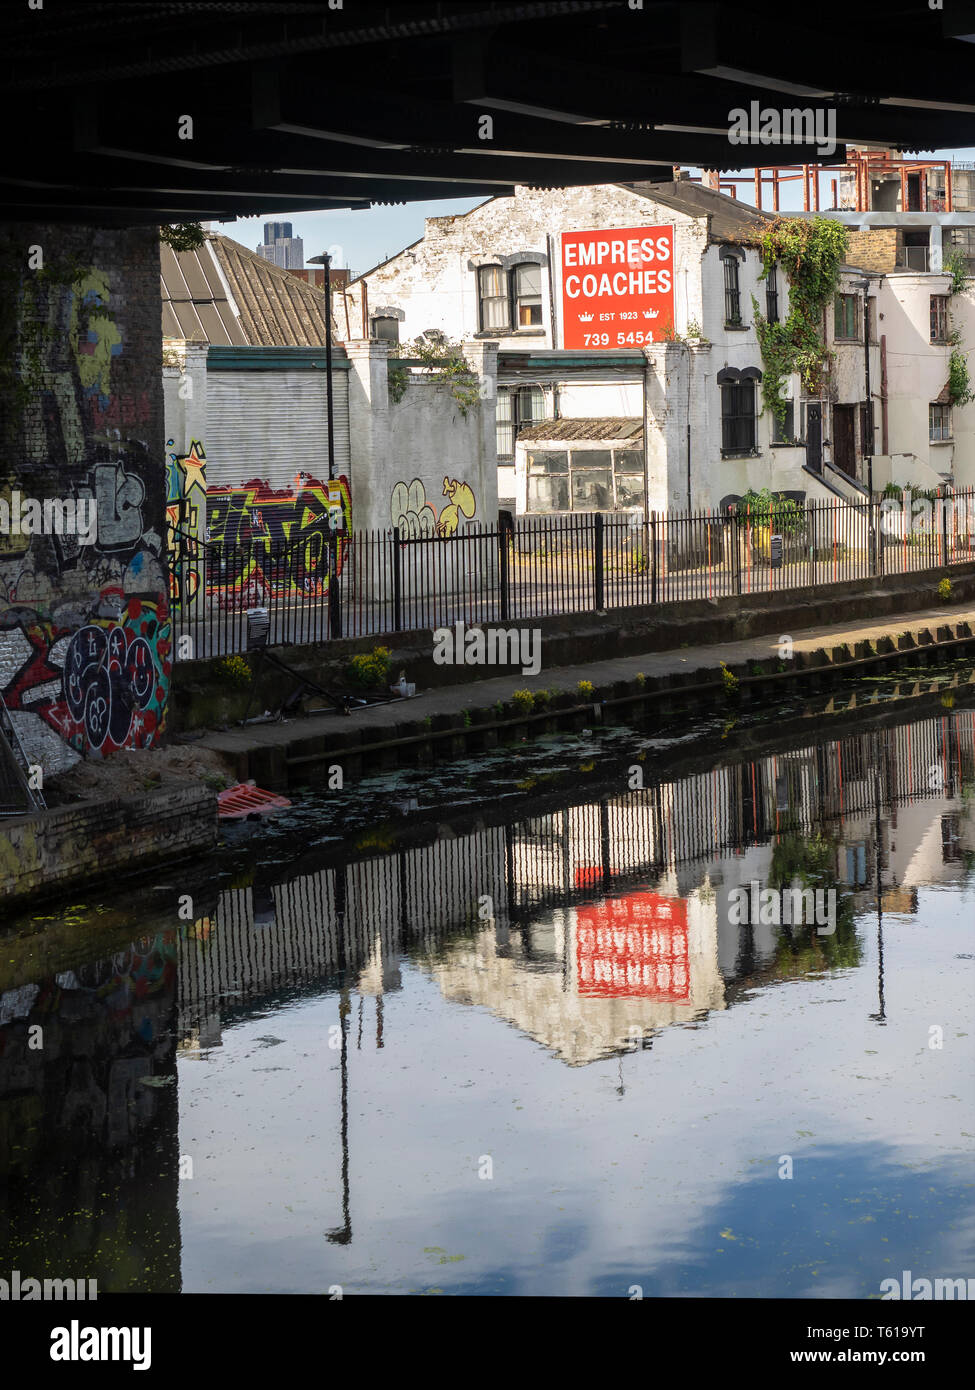 LONDON, UK - JUNE 14, 2018: View through Bridge across to canal side buildings on the Regent's canal Stock Photo